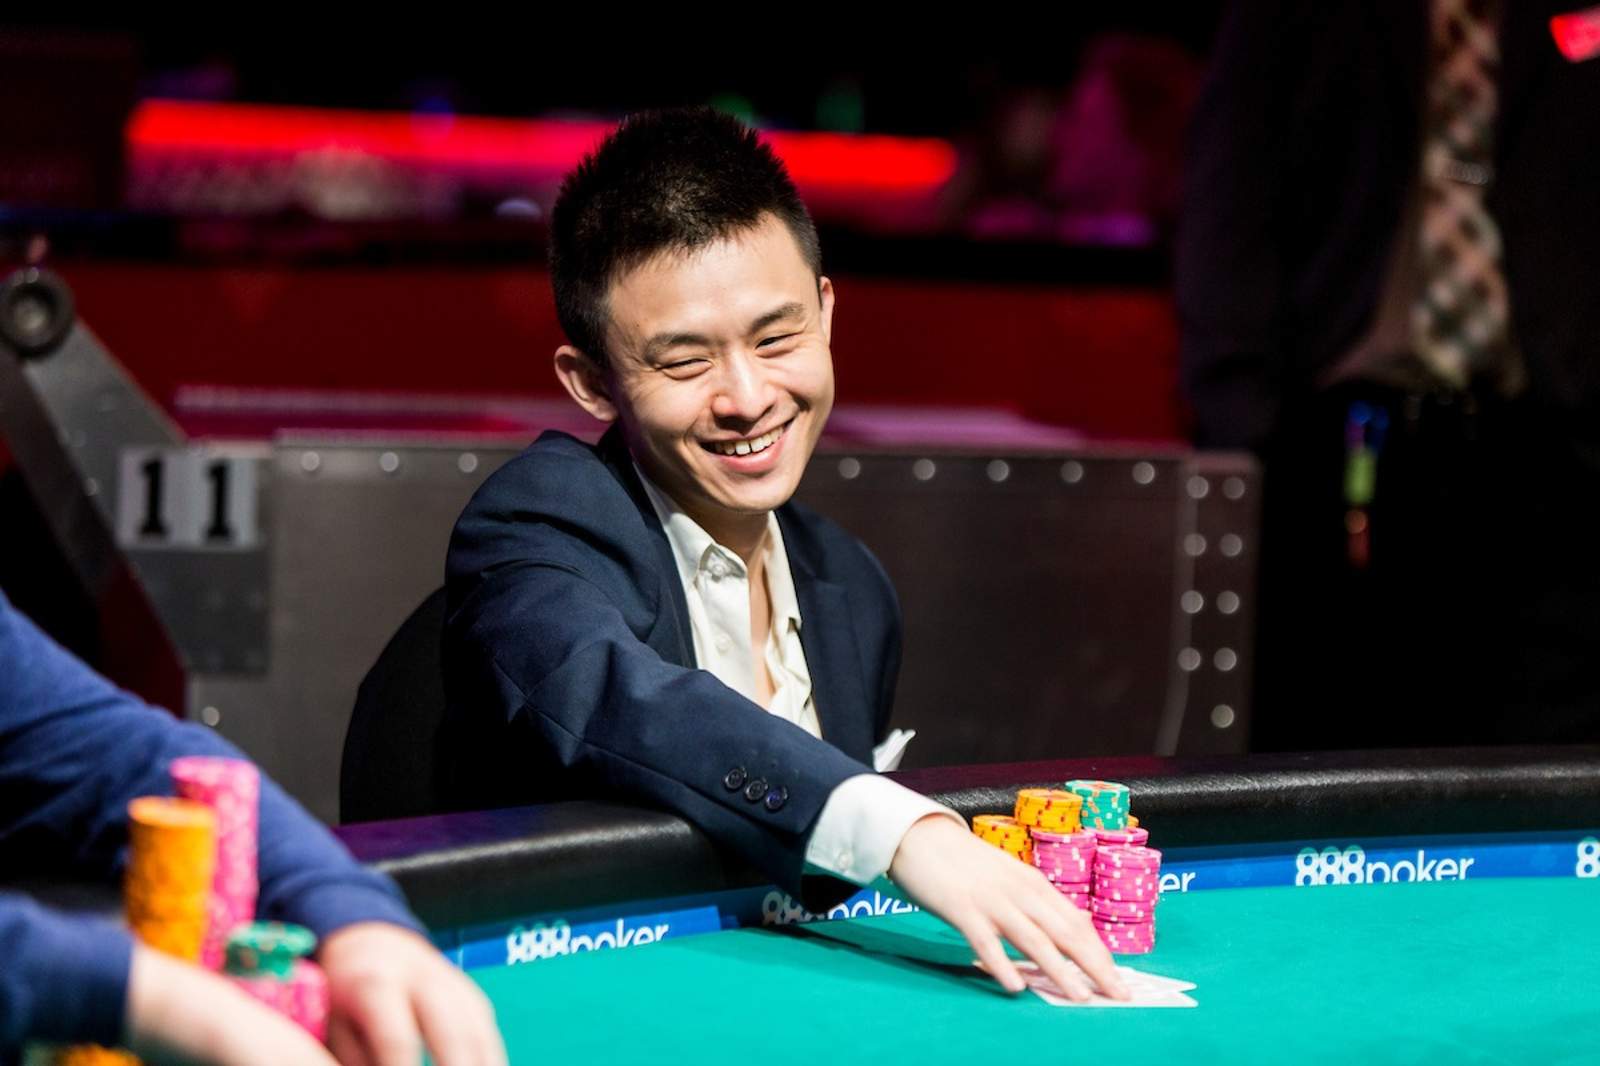 Team Leah Shines with Ben Yu in $25K Fantasy League